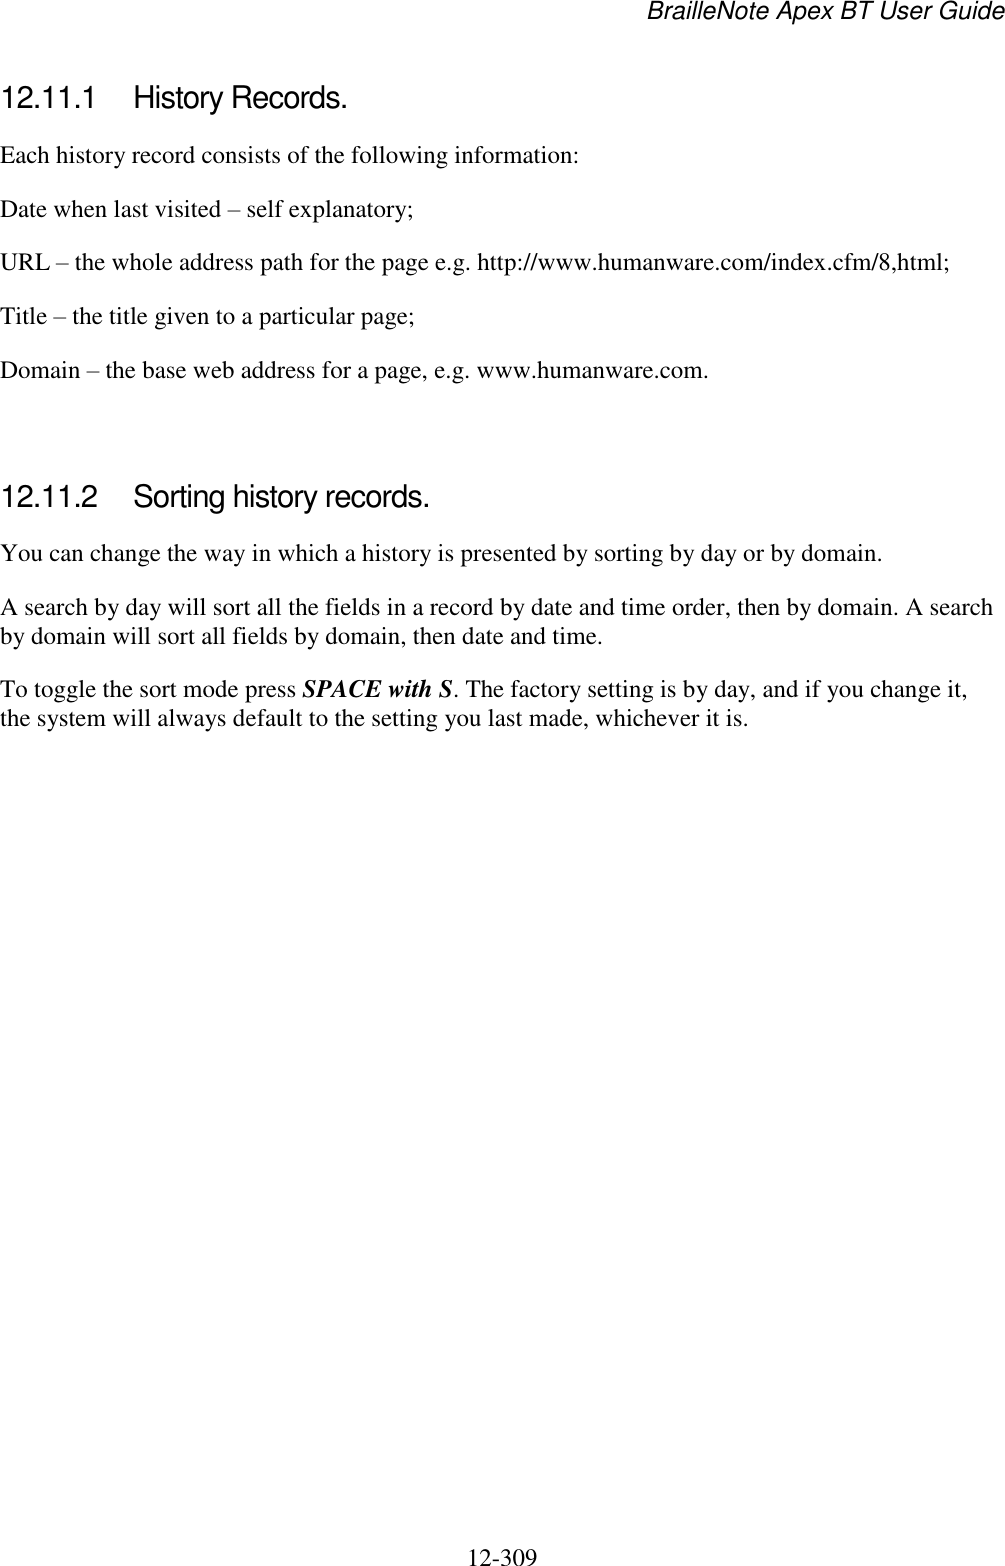 BrailleNote Apex BT User Guide   12-309   12.11.1  History Records. Each history record consists of the following information: Date when last visited – self explanatory; URL – the whole address path for the page e.g. http://www.humanware.com/index.cfm/8,html; Title – the title given to a particular page; Domain – the base web address for a page, e.g. www.humanware.com.   12.11.2  Sorting history records. You can change the way in which a history is presented by sorting by day or by domain. A search by day will sort all the fields in a record by date and time order, then by domain. A search by domain will sort all fields by domain, then date and time. To toggle the sort mode press SPACE with S. The factory setting is by day, and if you change it, the system will always default to the setting you last made, whichever it is.   